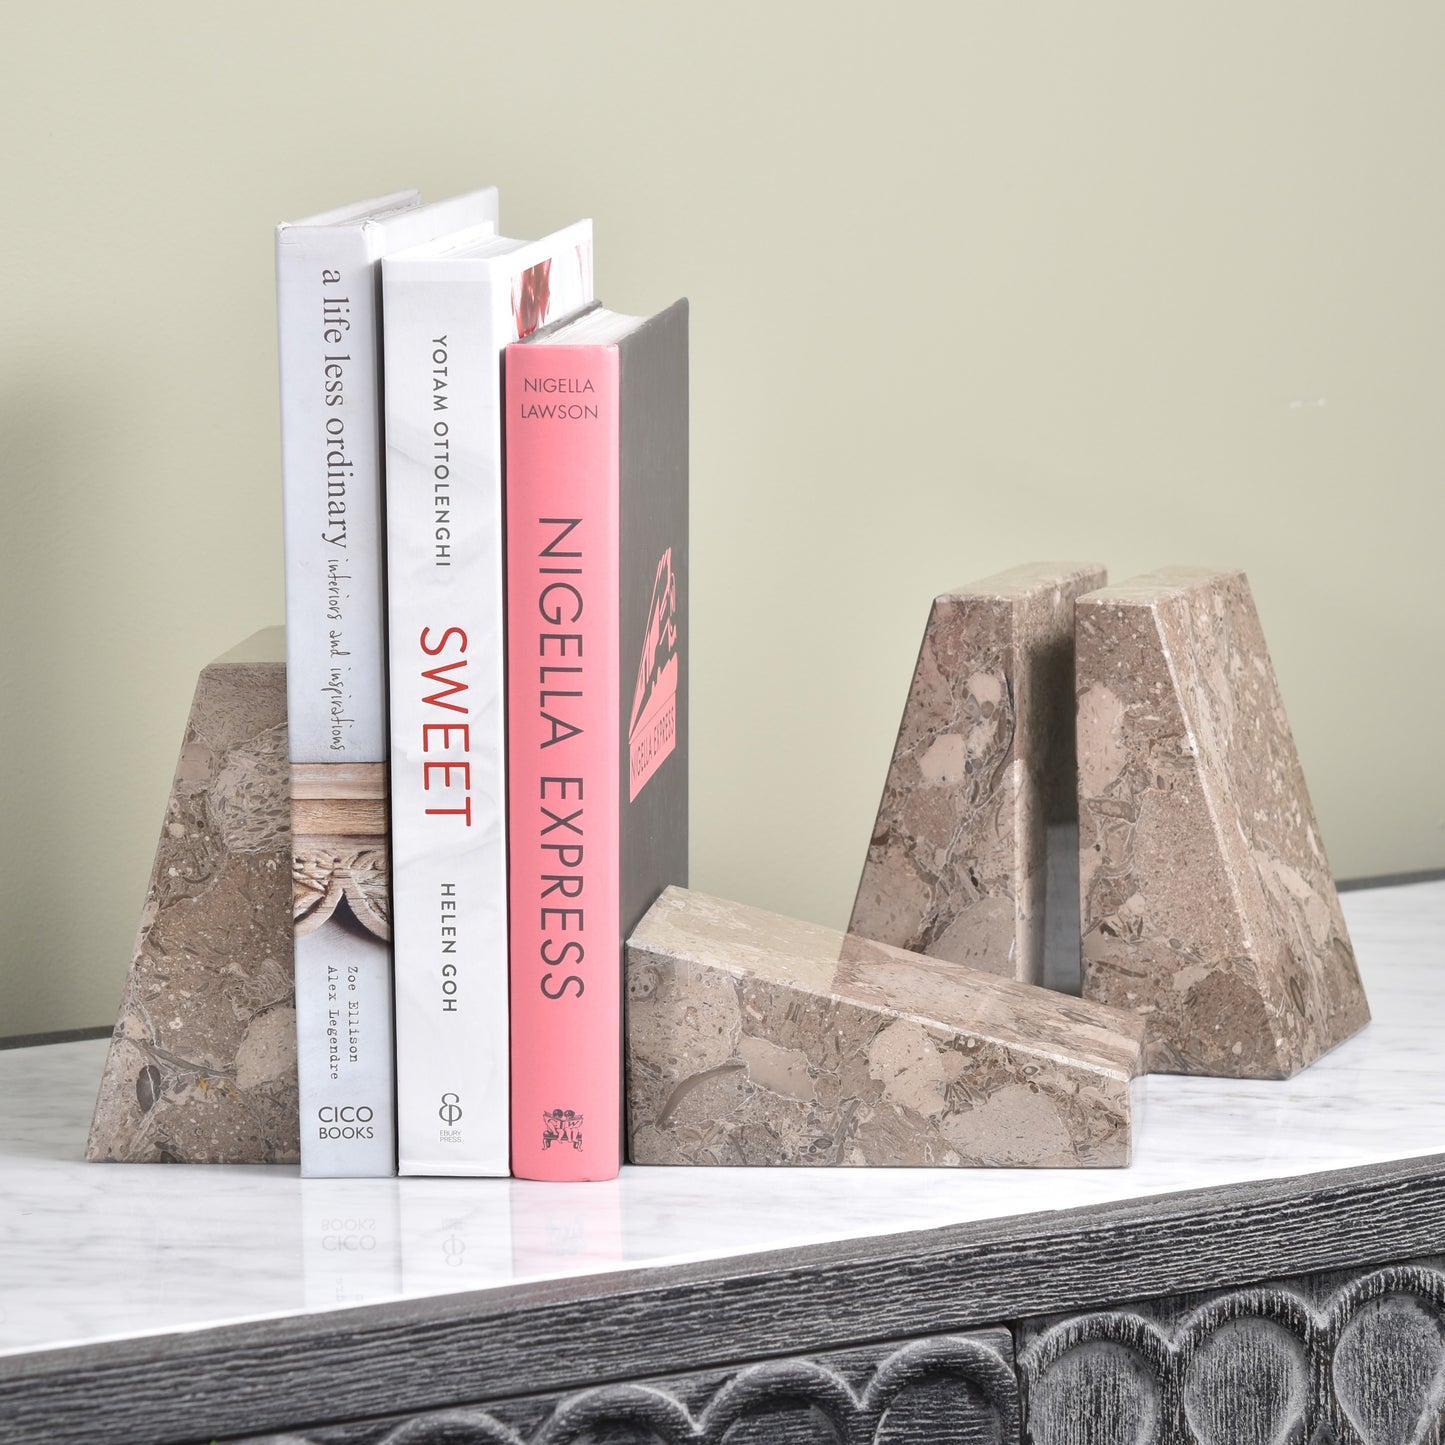 Solid Marble Bookends - Dark Fossil Stone